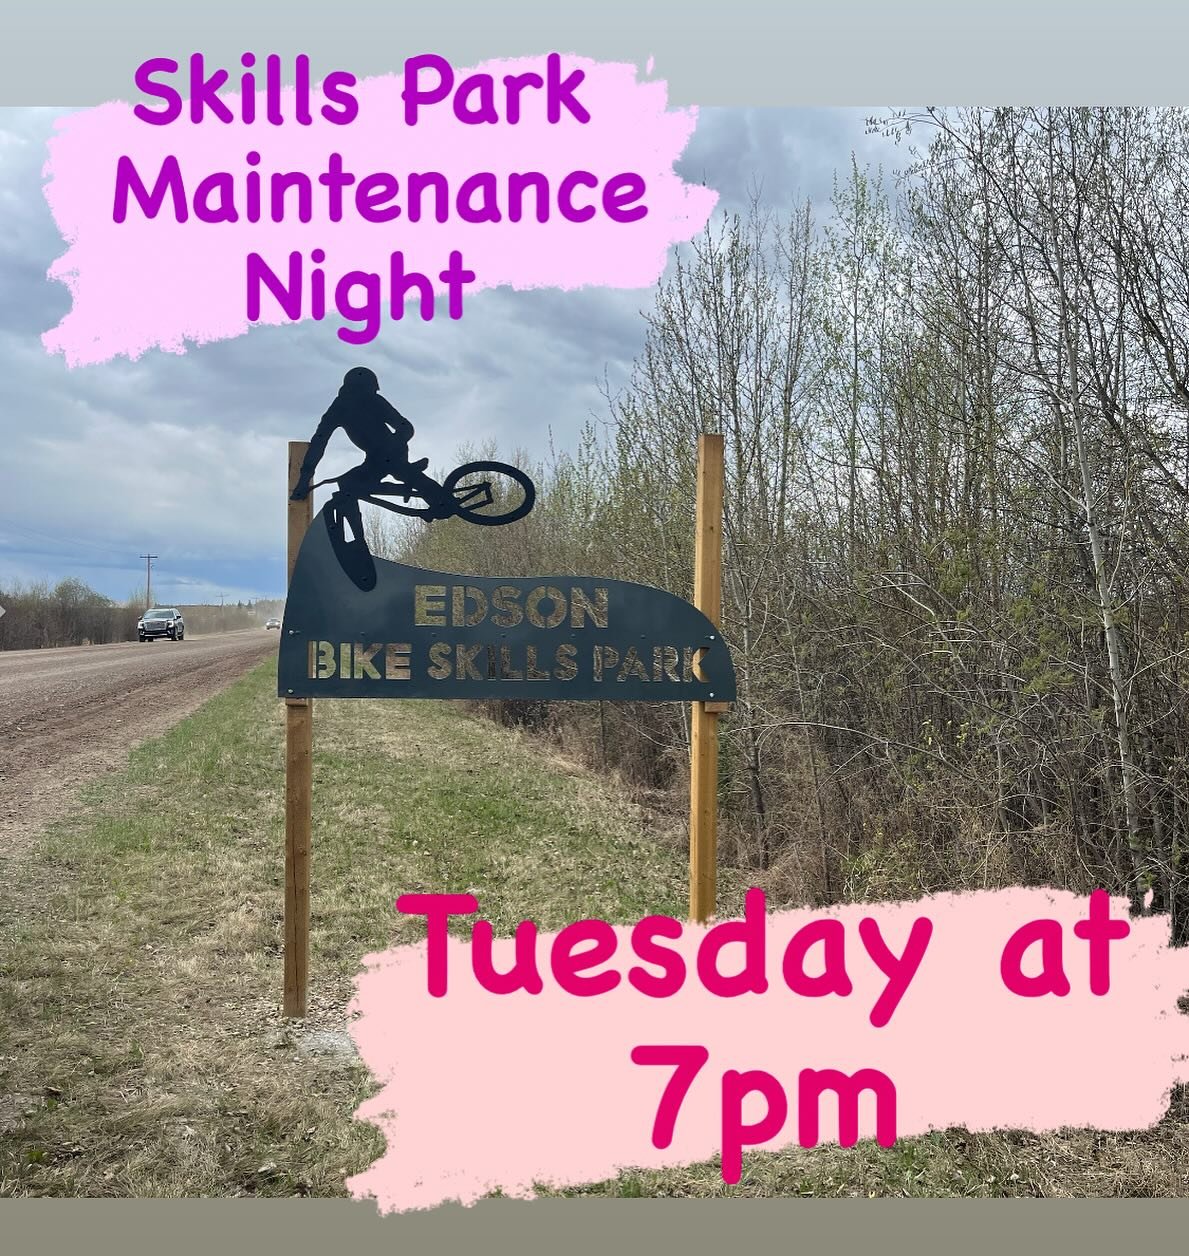 Everyone welcome! This will be an effort to fine tune a few things and see if we can have the skills park officially open for the May long weekend!